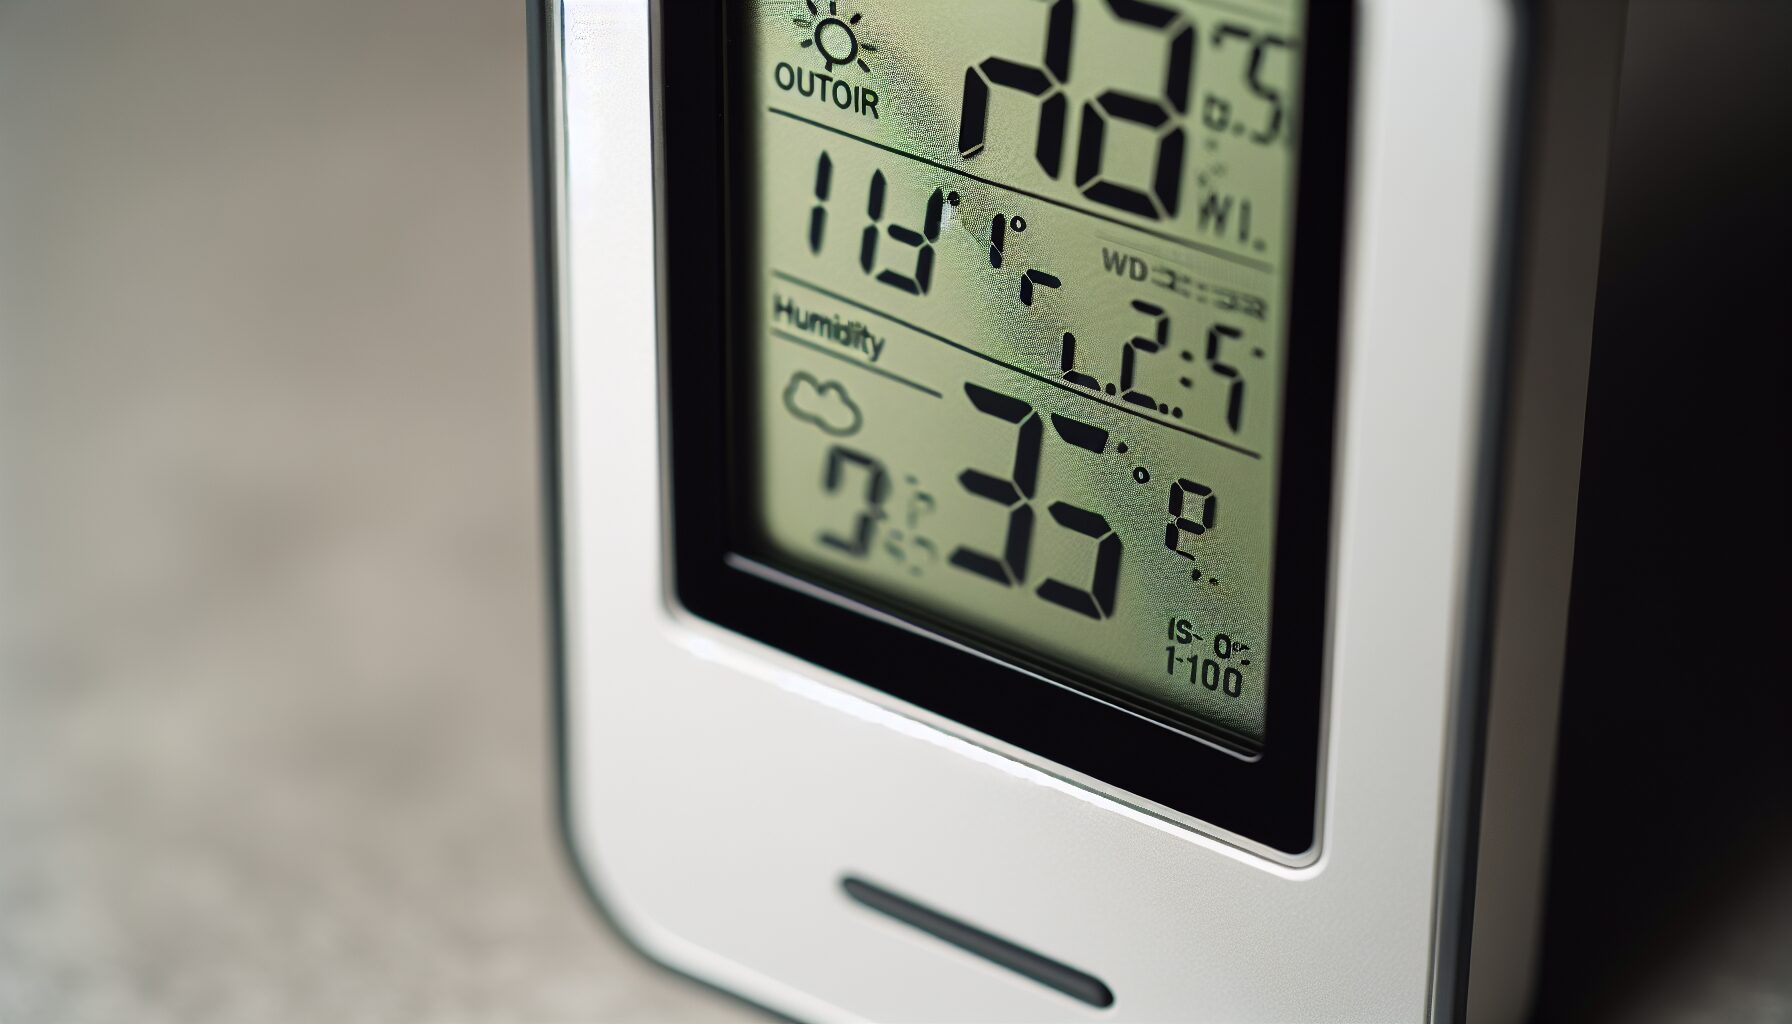 Digital Display of a Indoor and Outdoor Thermometer